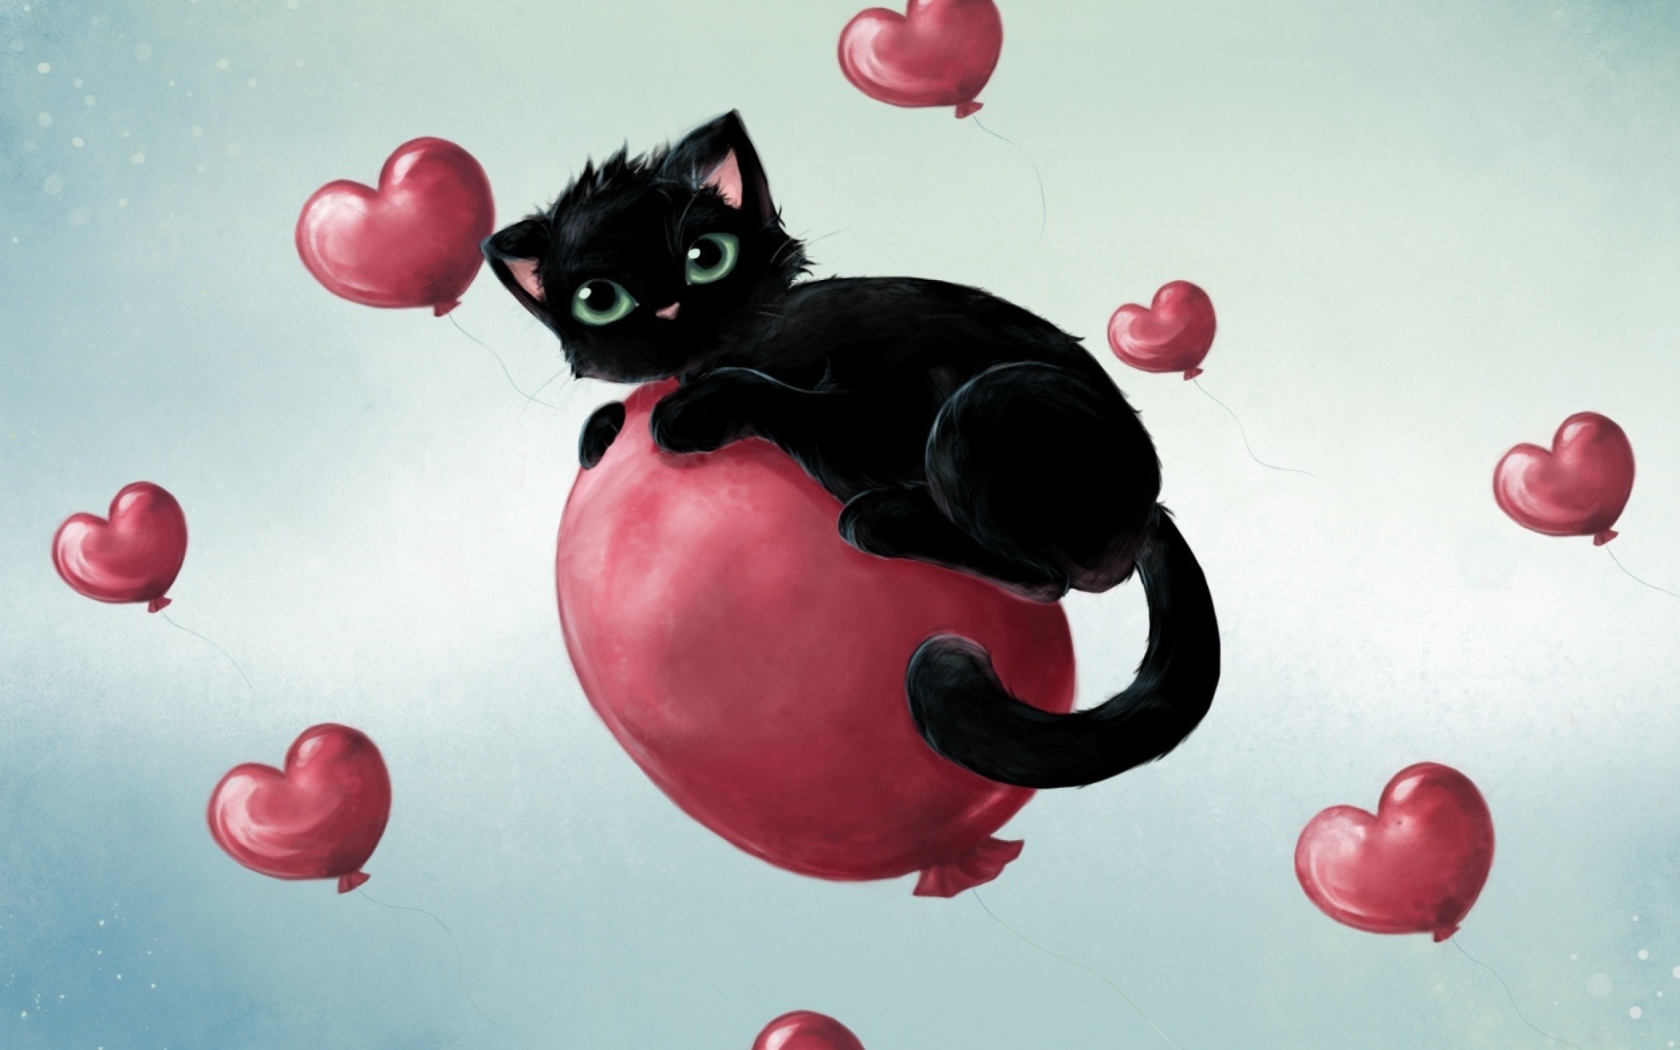 Black Kitty And Baloons wallpaper 1680x1050